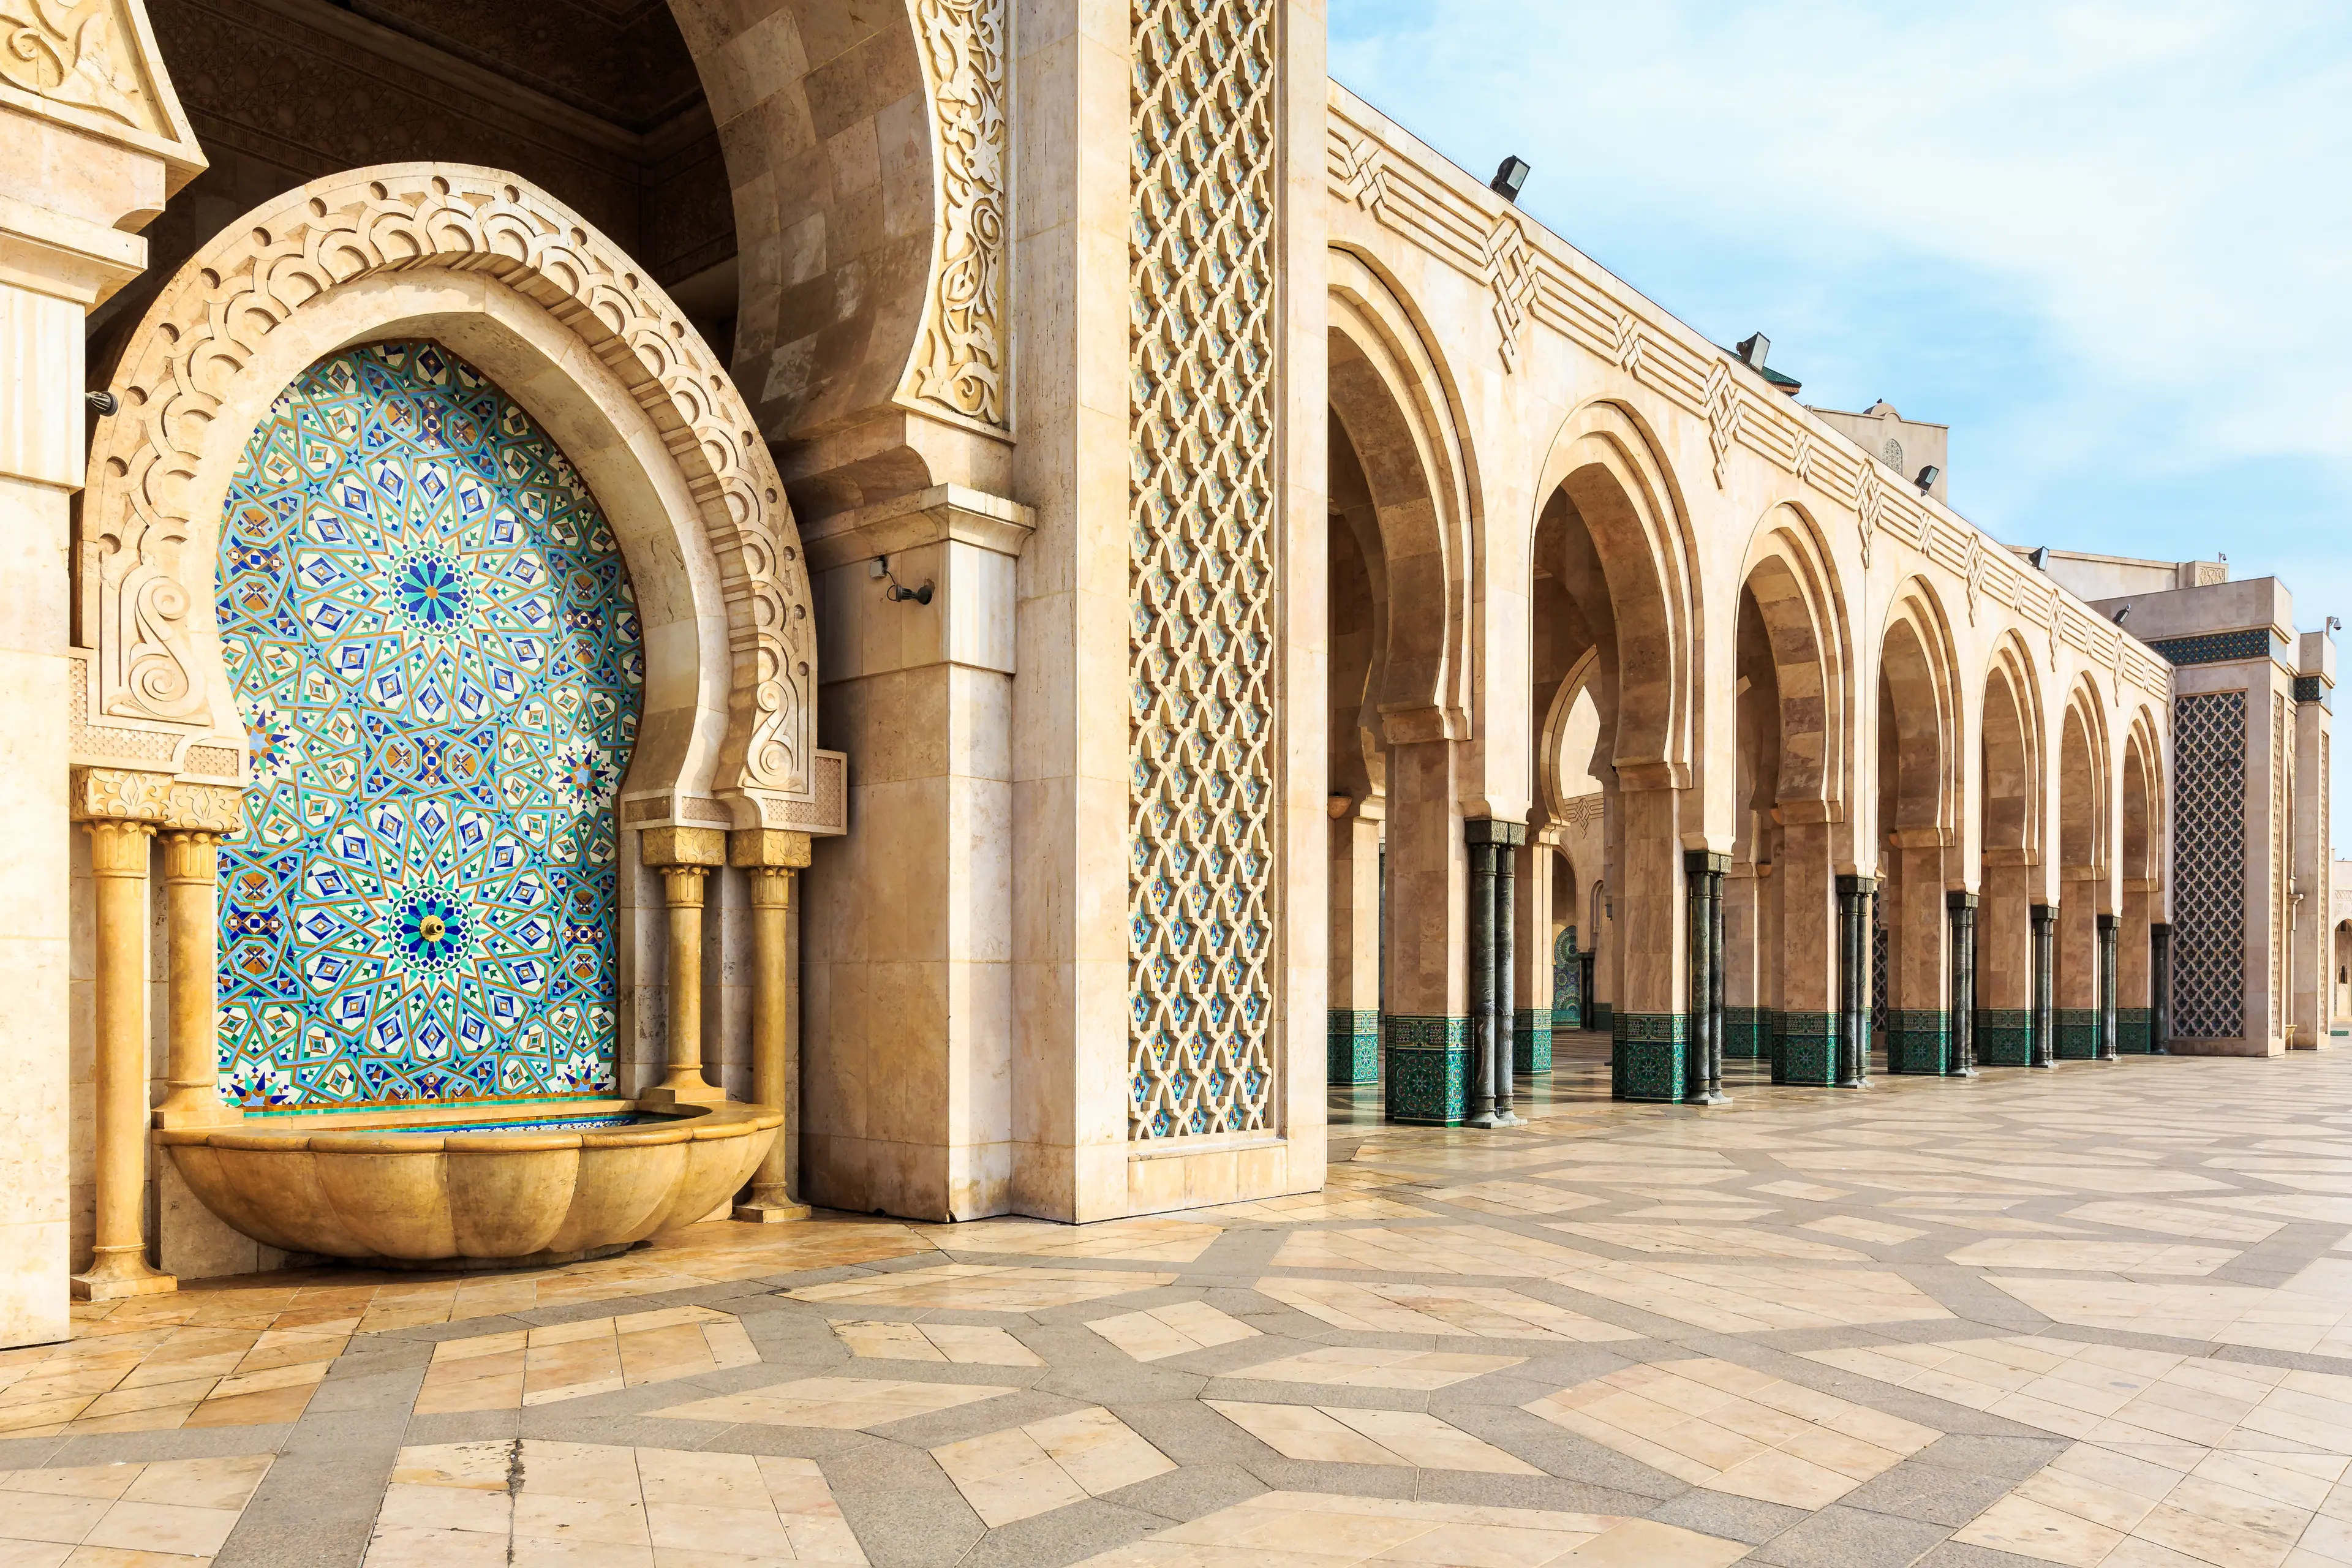 Close-up of a fountain at the Hassan II mosque